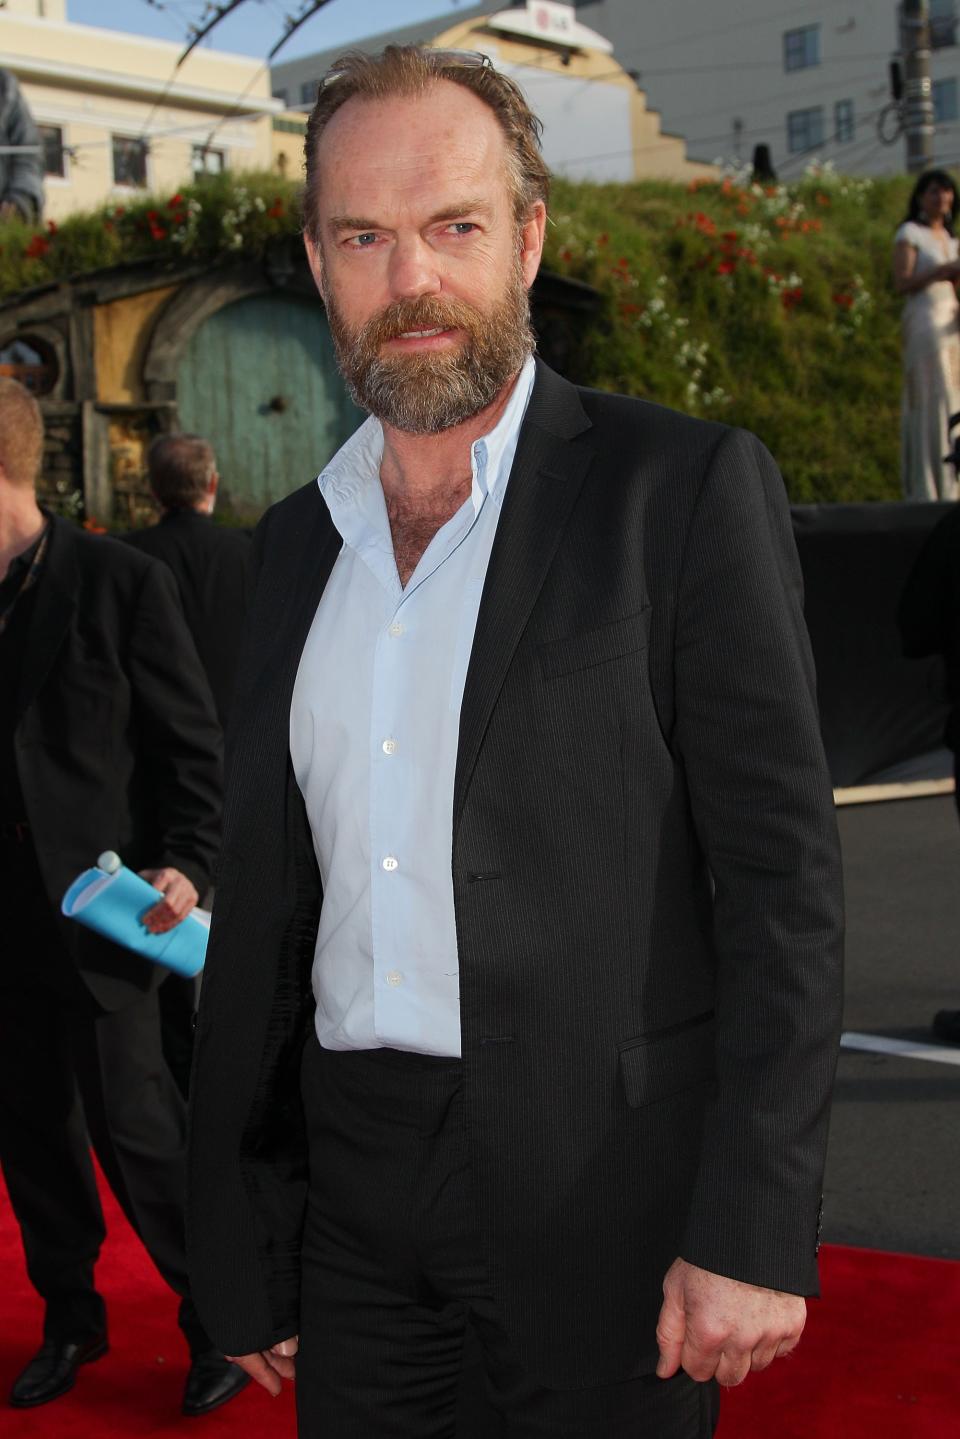 WELLINGTON, NEW ZEALAND - NOVEMBER 28: Hugo Weaving, who plays Elrond, arrives at the "The Hobbit: An Unexpected Journey" World Premiere at Embassy Theatre on November 28, 2012 in Wellington, New Zealand. (Photo by Hagen Hopkins/Getty Images)